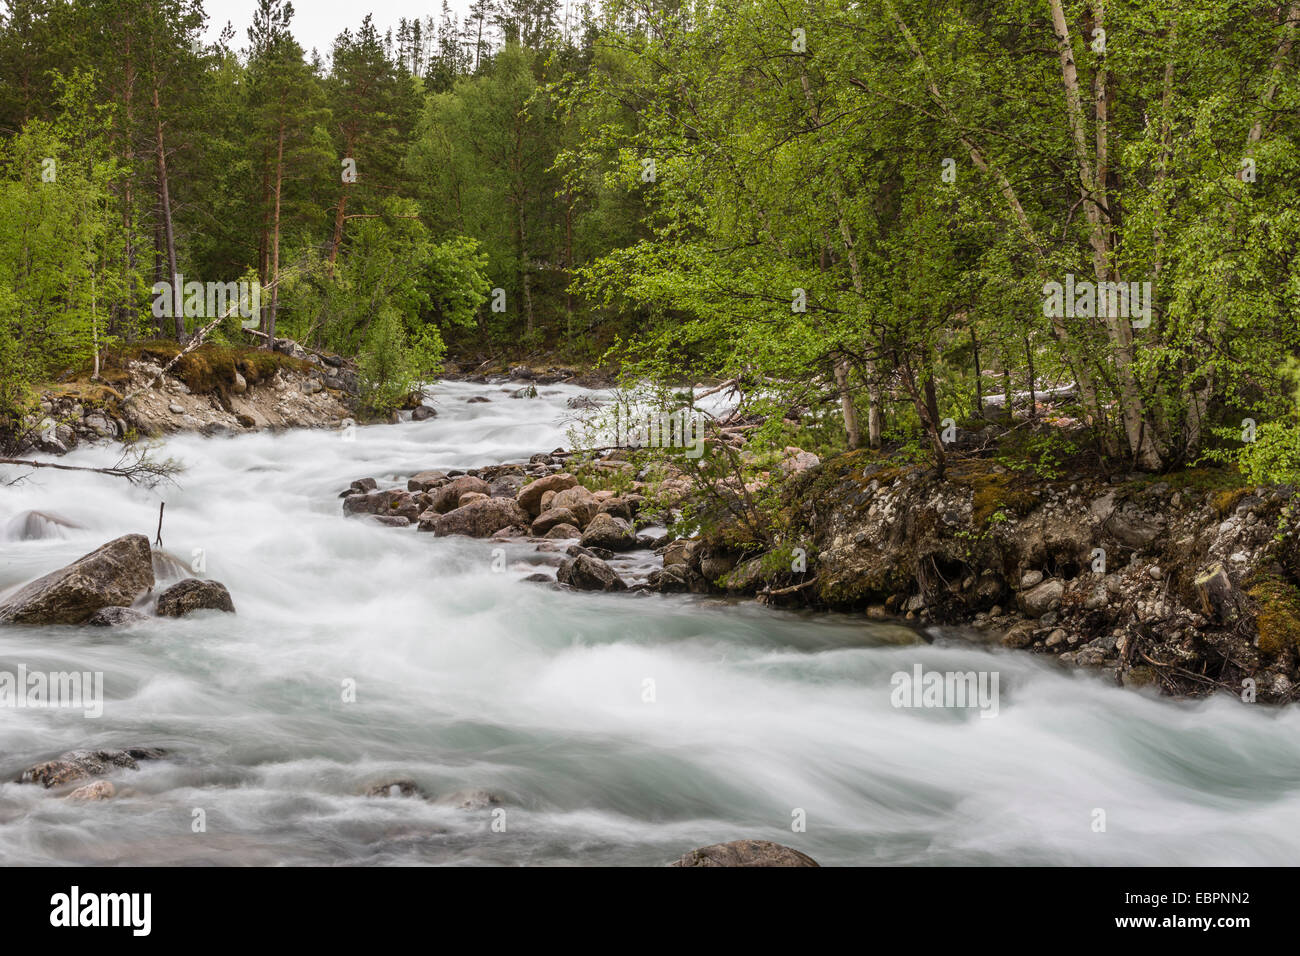 Slow motion blur detail of a raging river in Hellmebotyn, Tysfjord, Norway, Scandinavia, Europe Stock Photo